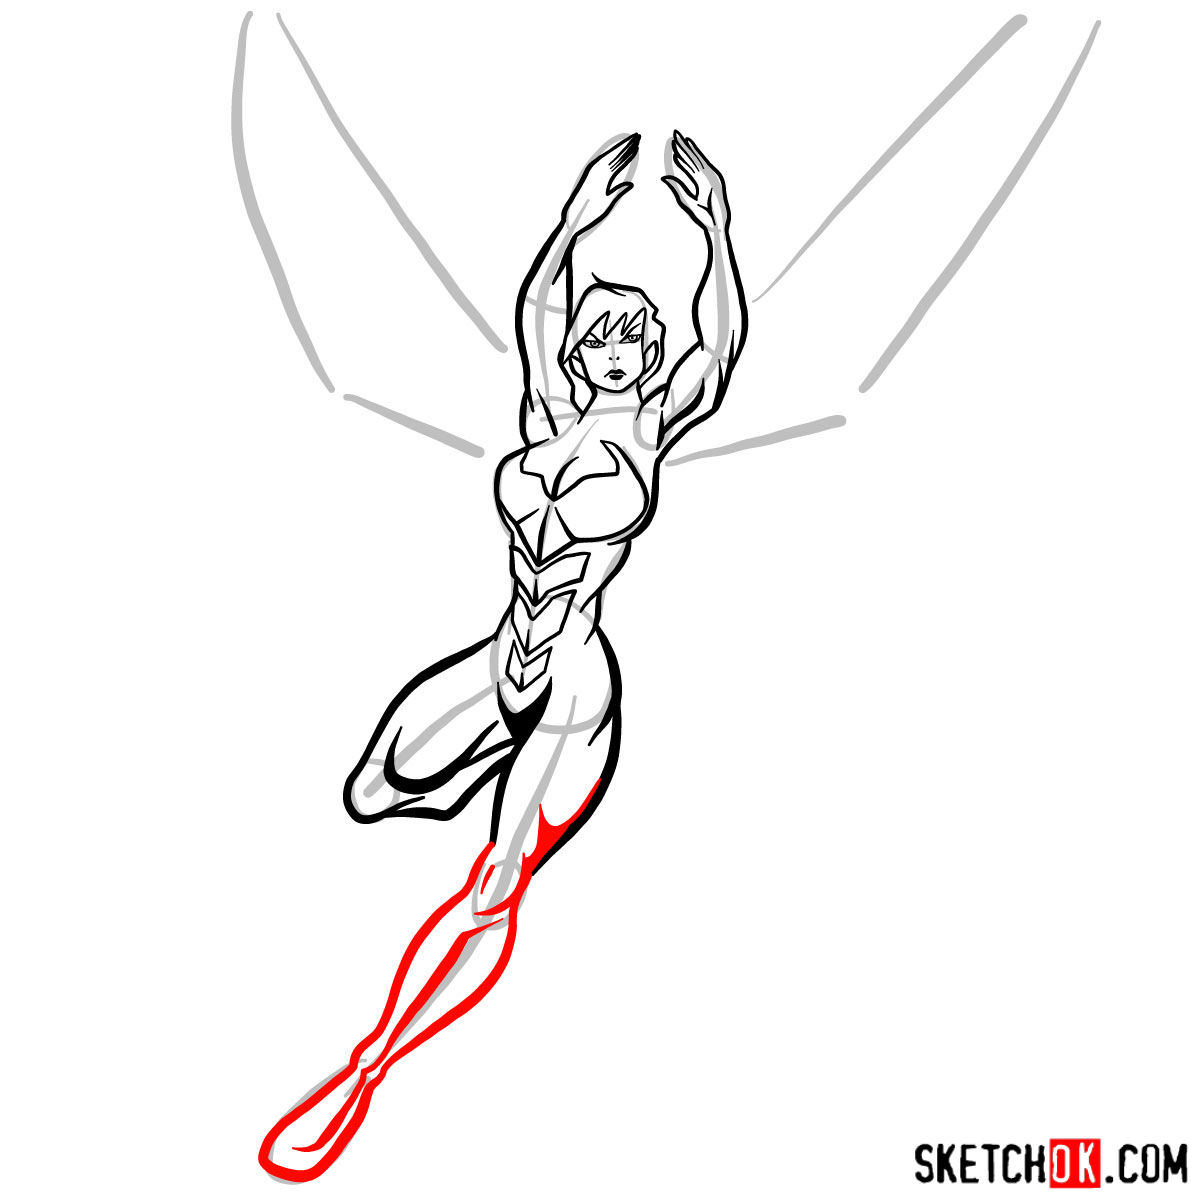 How to draw Wasp, Janet van Dyne from Marvel Comics - step 11